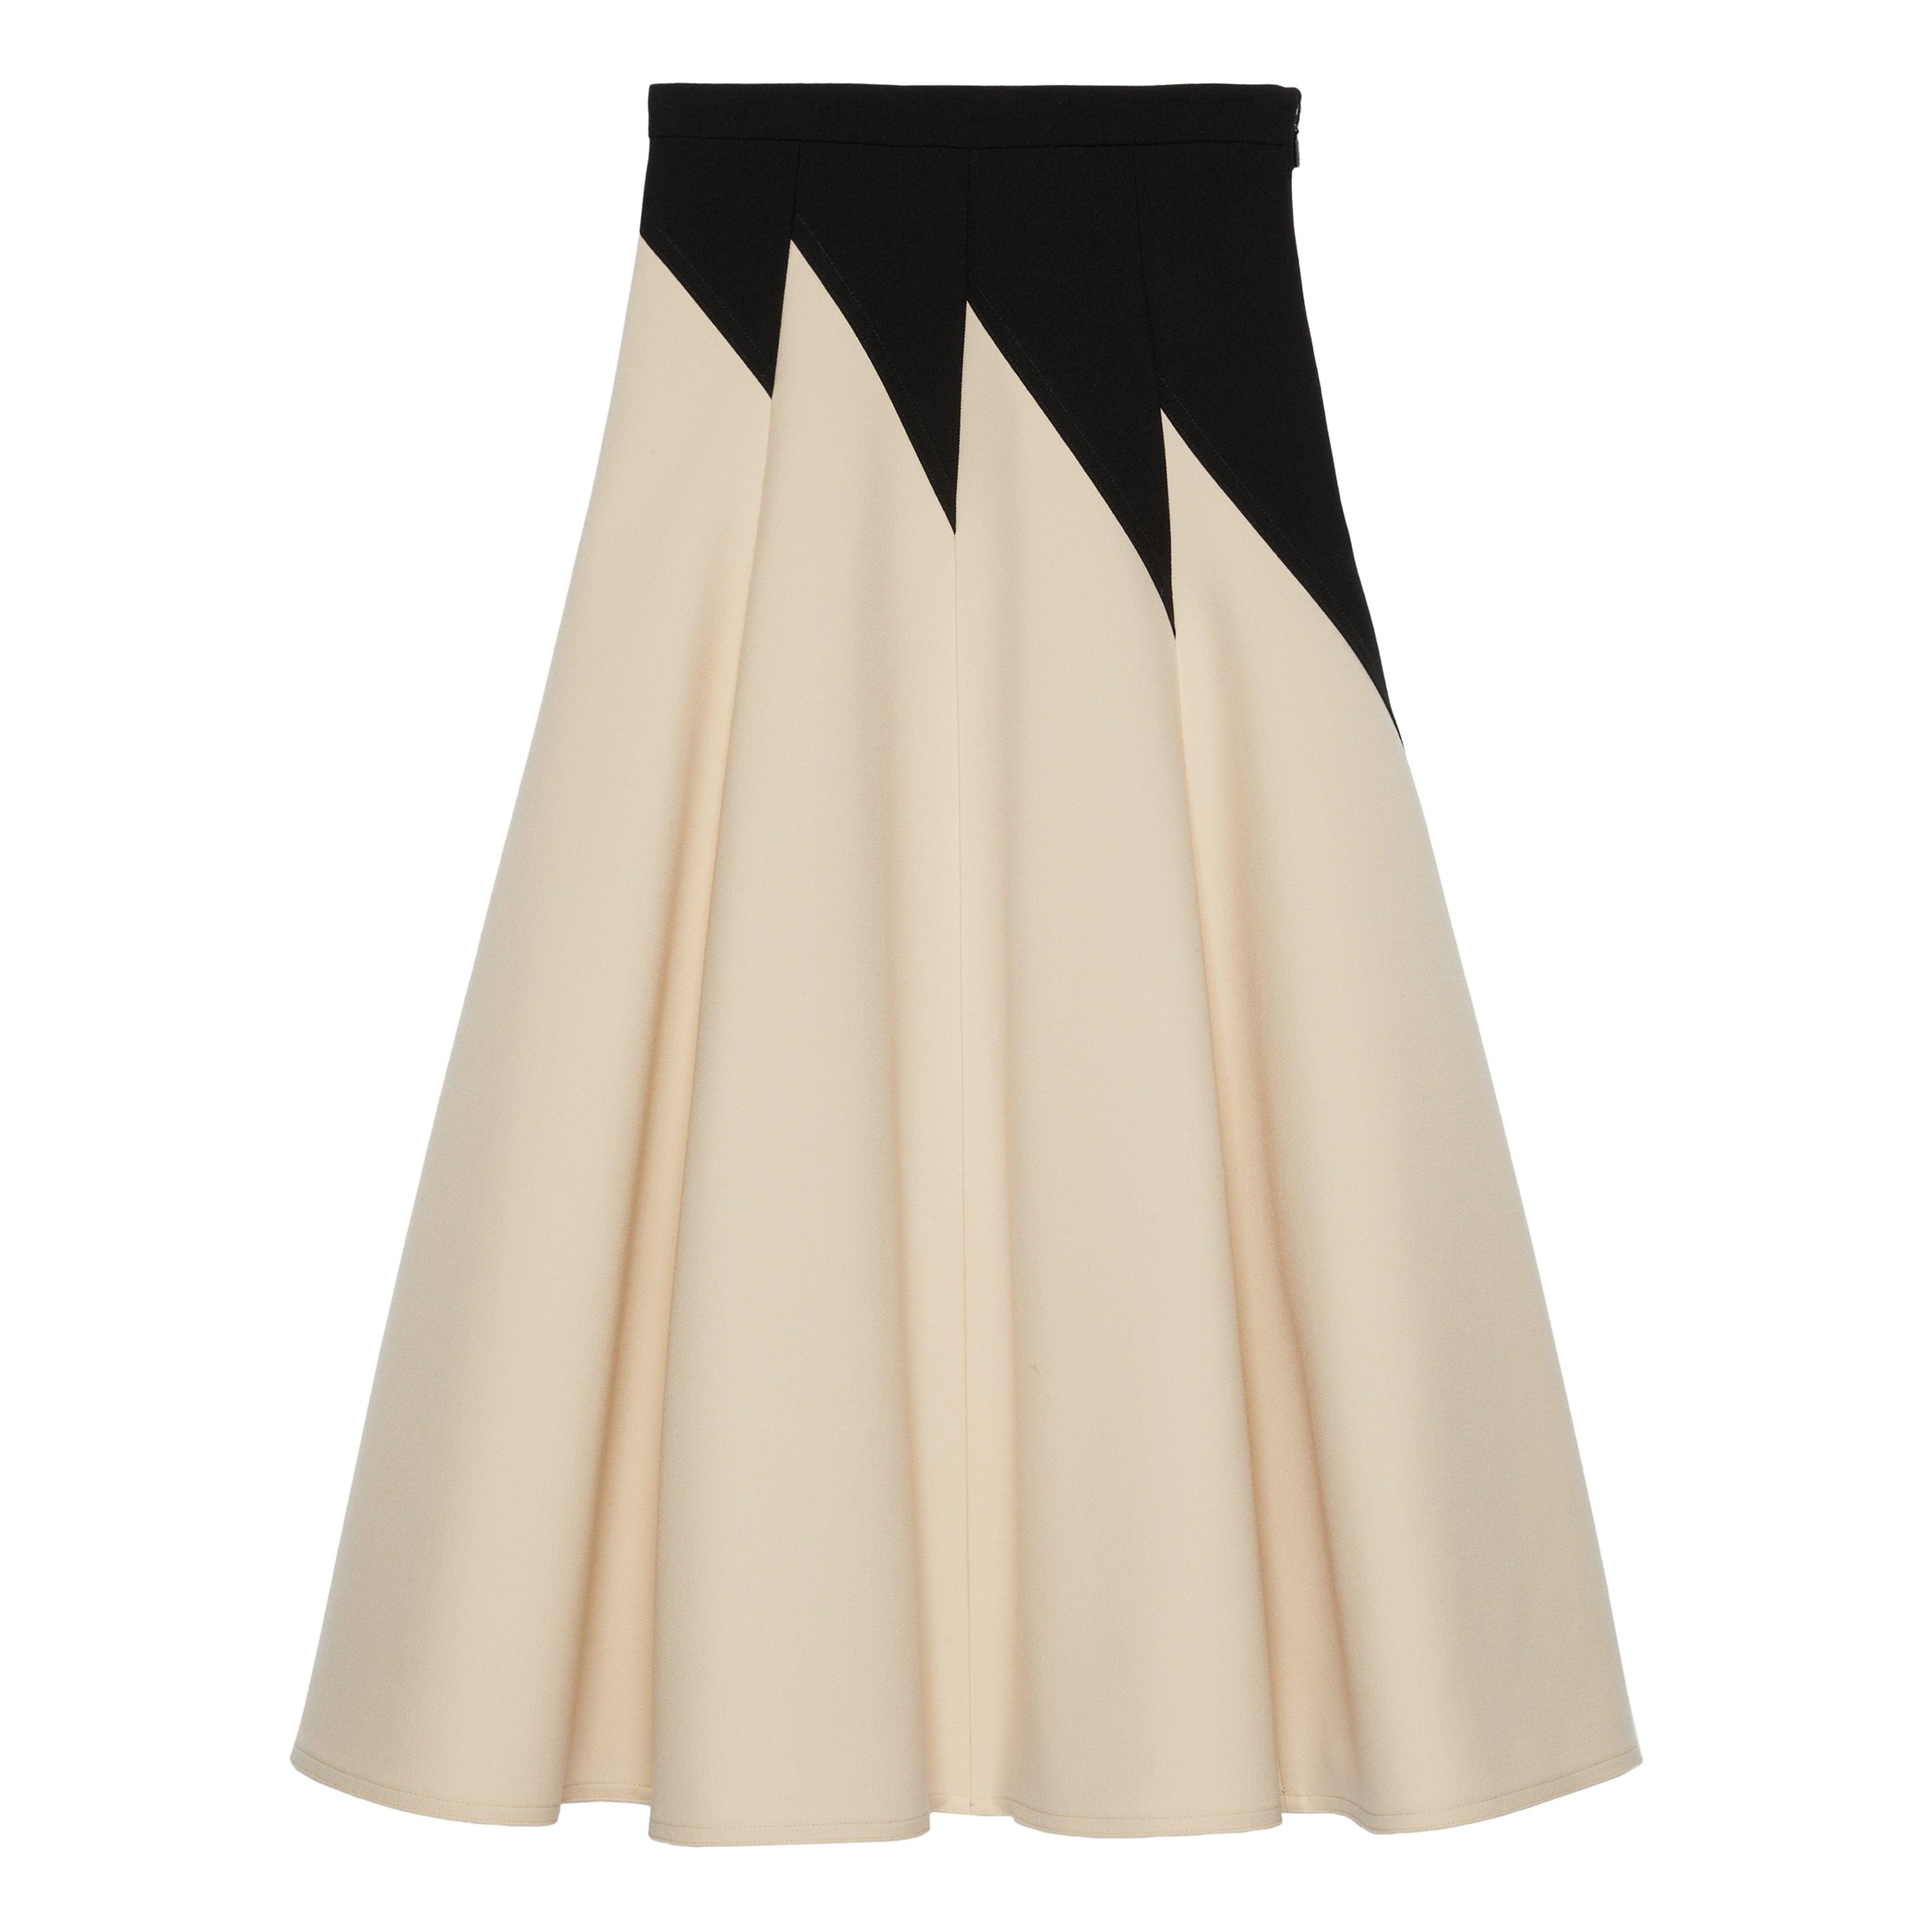 Gucci - Women’s DSM Exclusive Wool Cover Comfort Midi Skirt - (Black/Ivory) by GUCCI